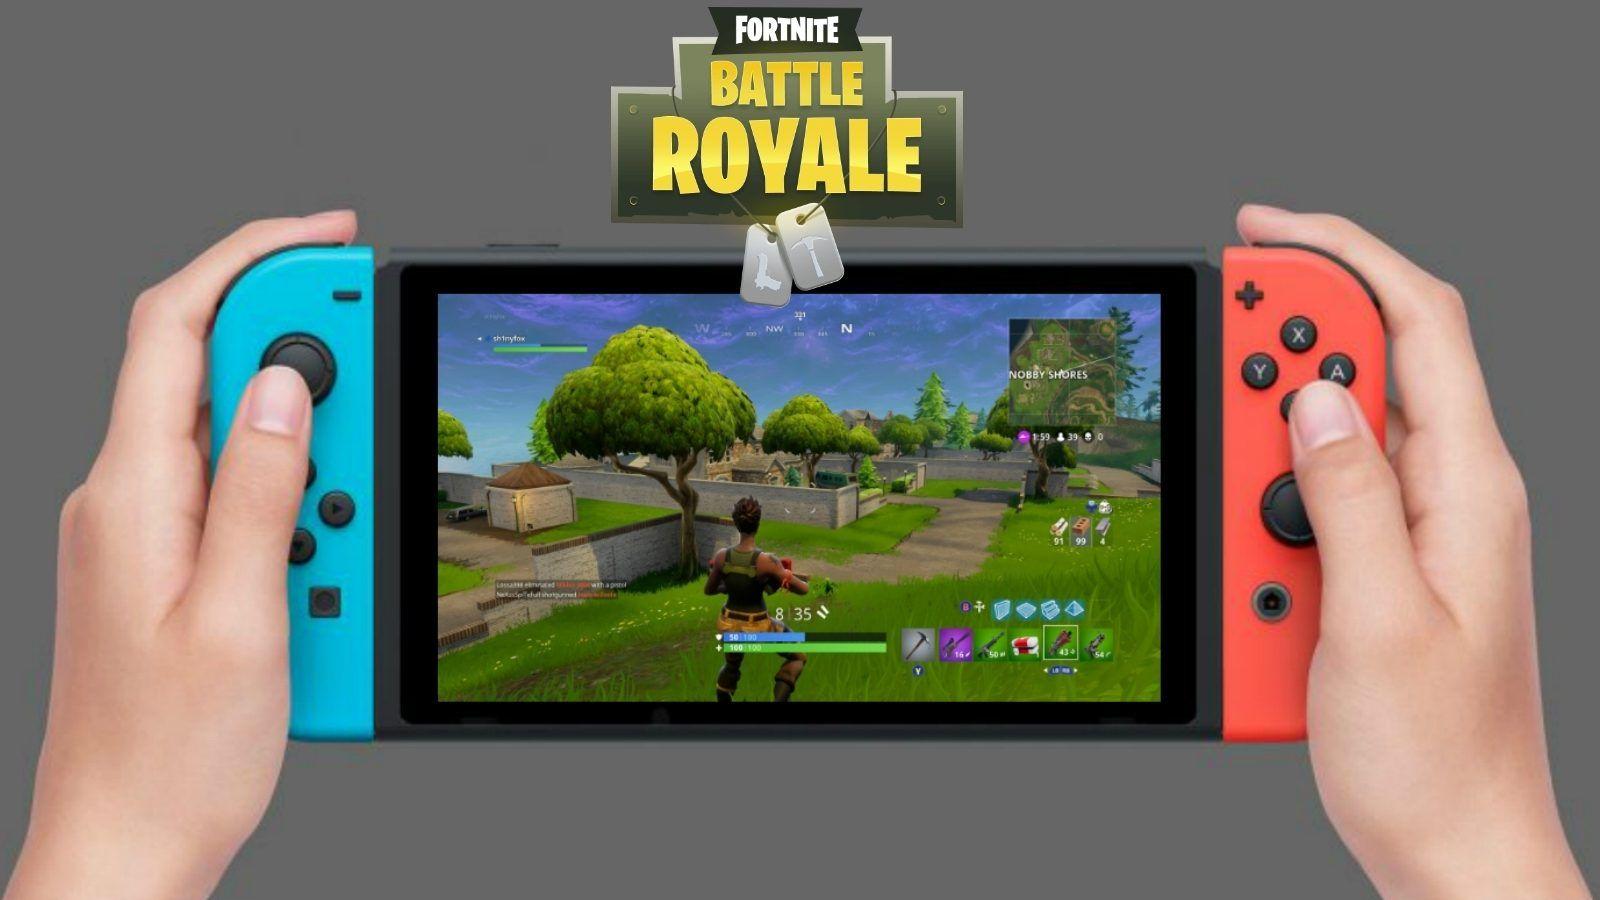 Small Fortnite Battle Royale Logo - Epic Games Announces a Small Fortnite Update for the Nintendo Switch